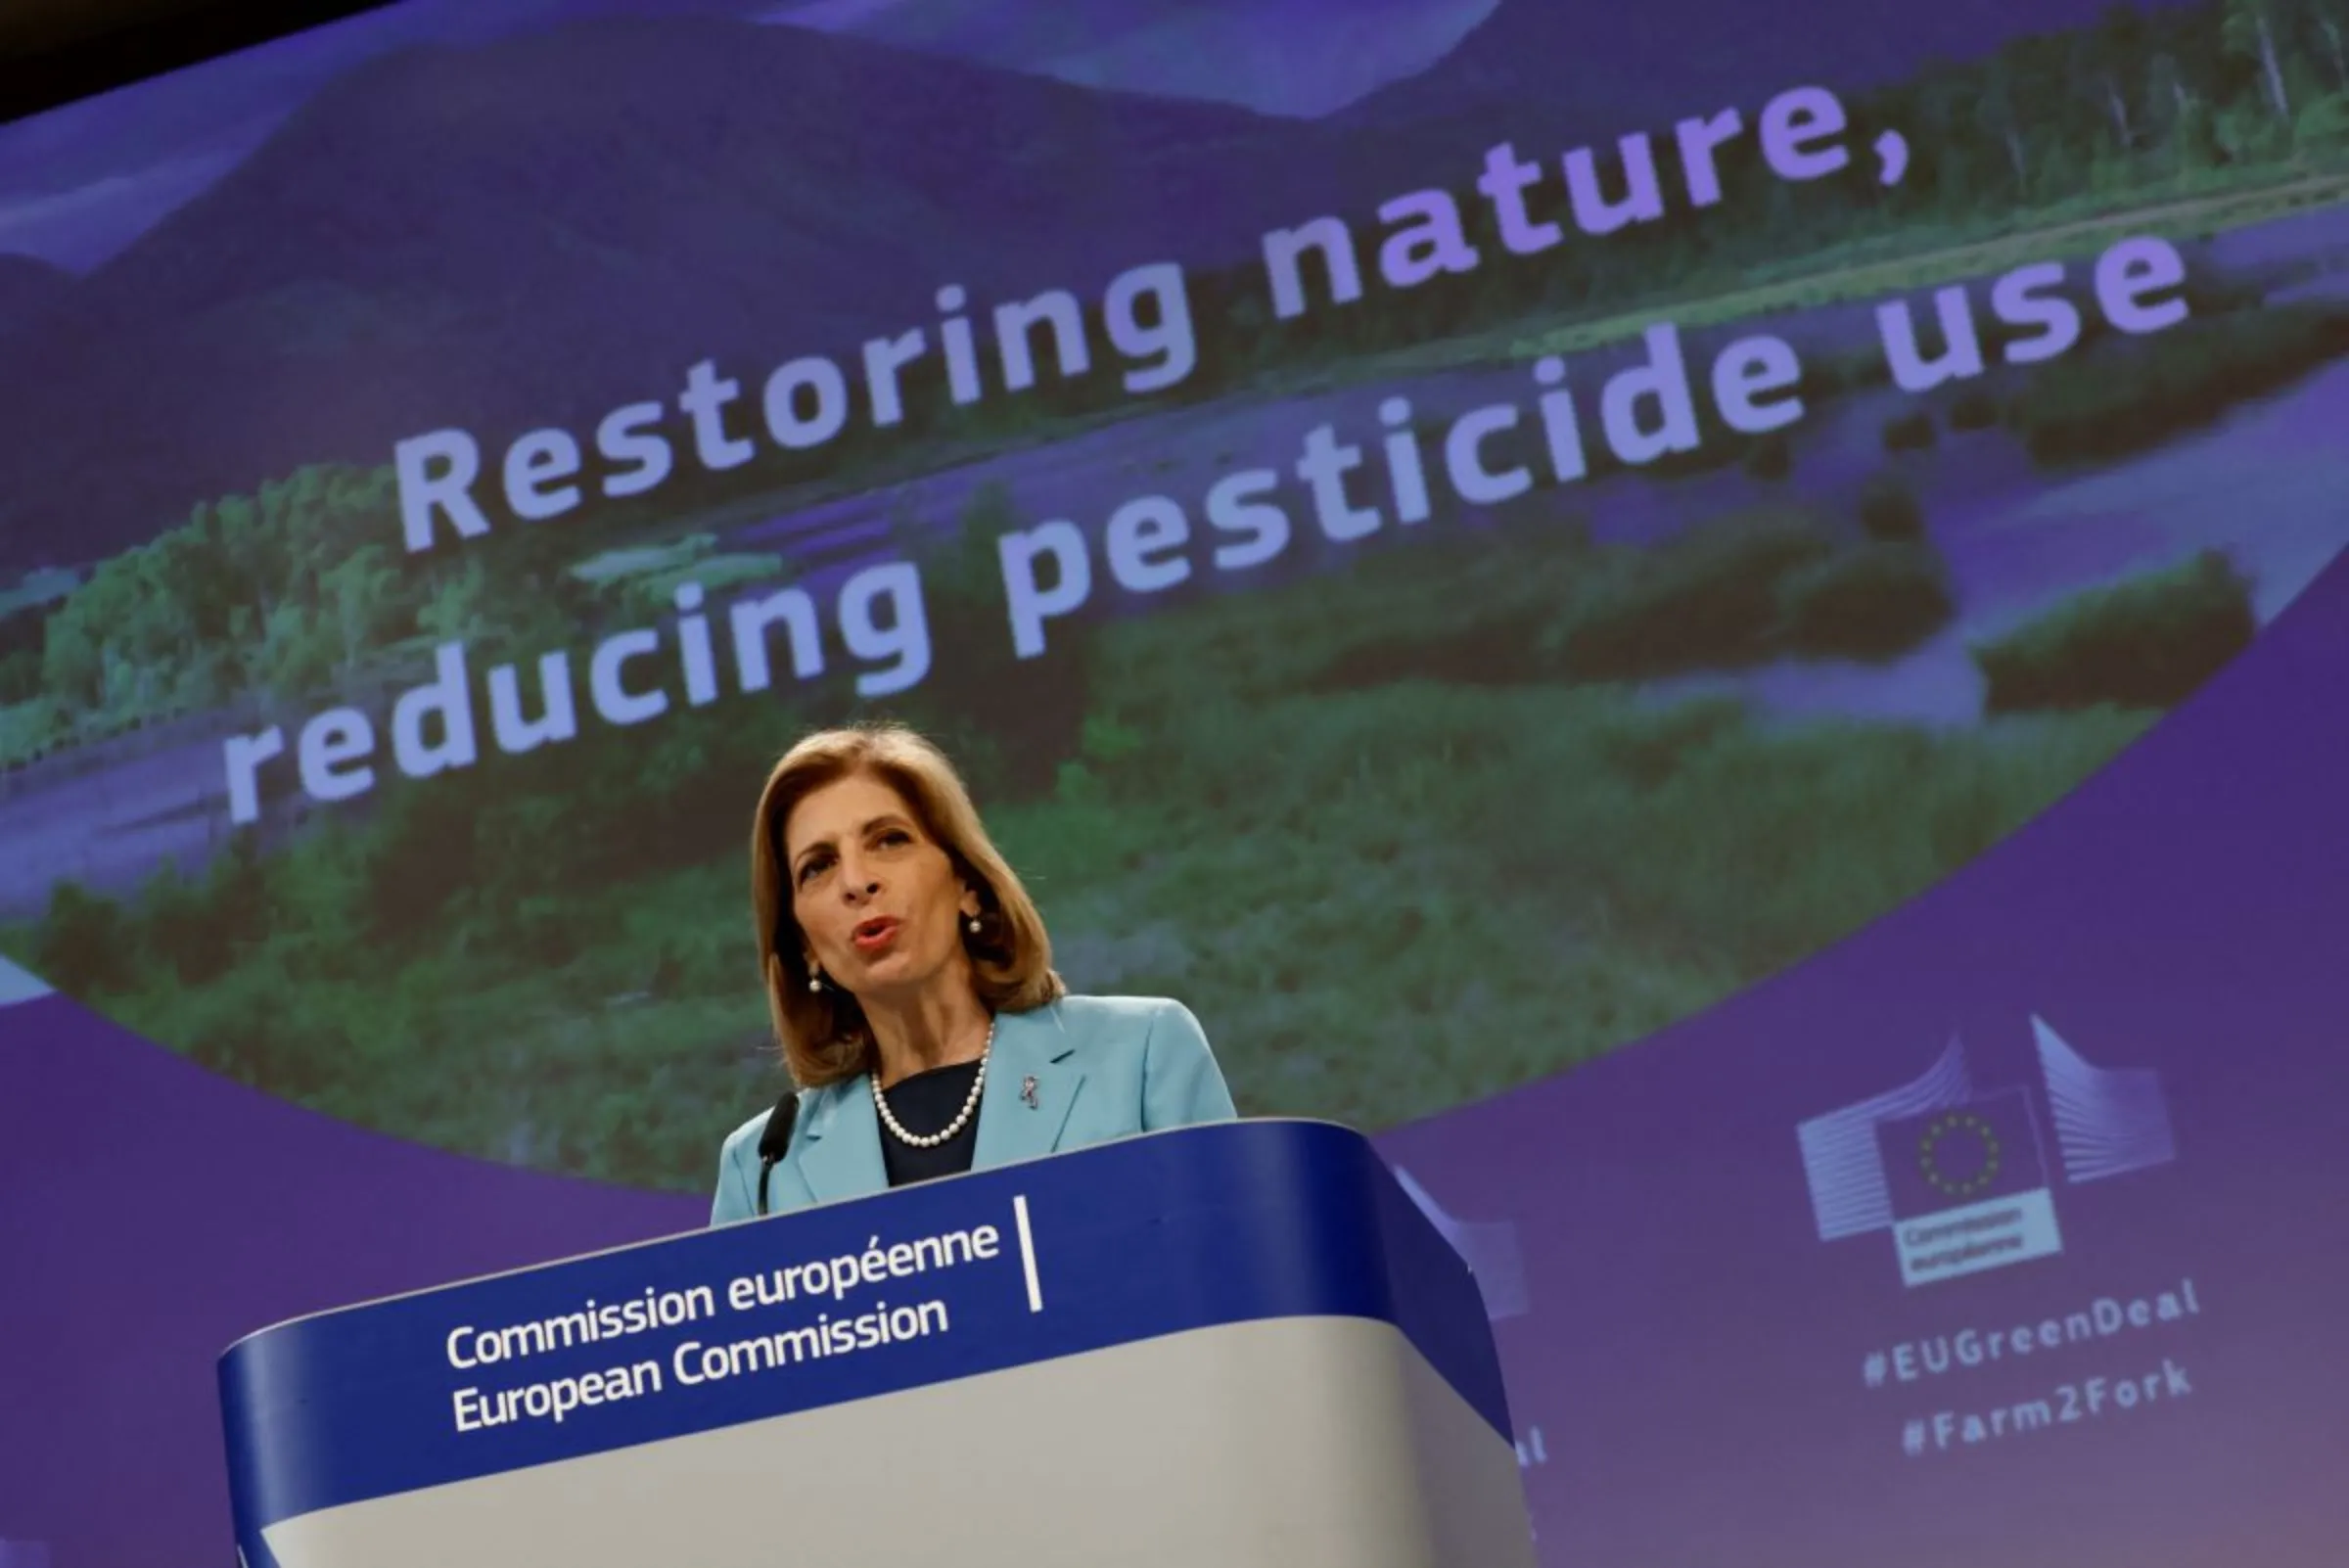 European Commissioner for Health and Food Safety Stella Kyriakides speaks during a news conference on the proposal by the European Commission of two laws to cut the environmental impact of pesticides and set aside land for nature restoration, in Brussels, Belgium June 22, 2022. REUTERS/Yves Herman